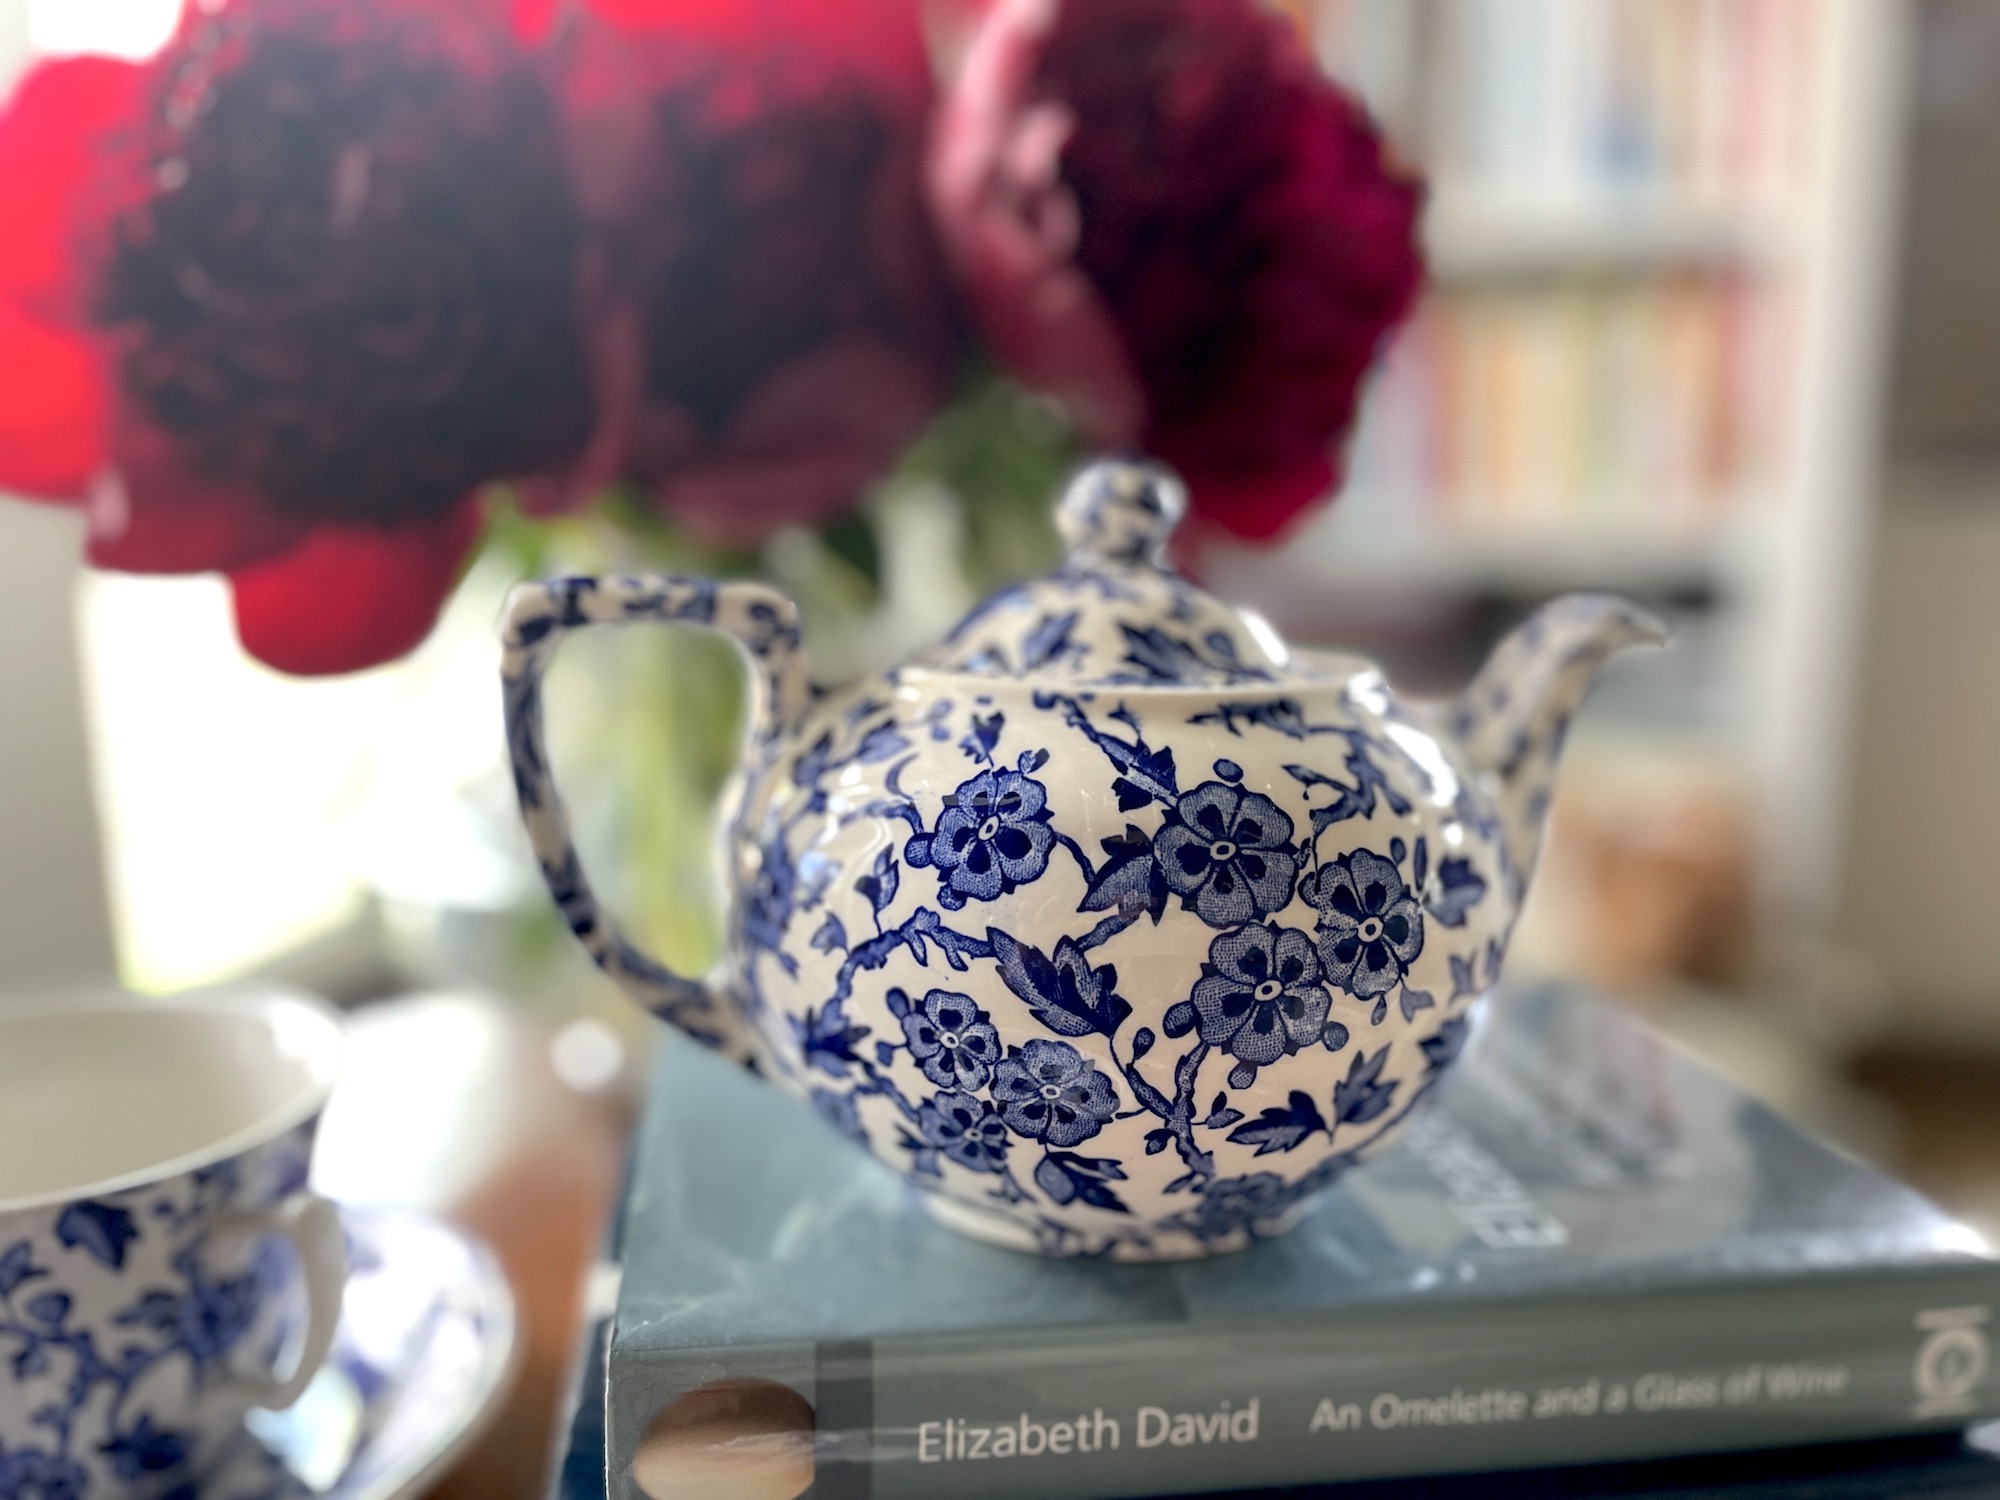 A Burleigh Tea Set for Two, the 4th giveaway